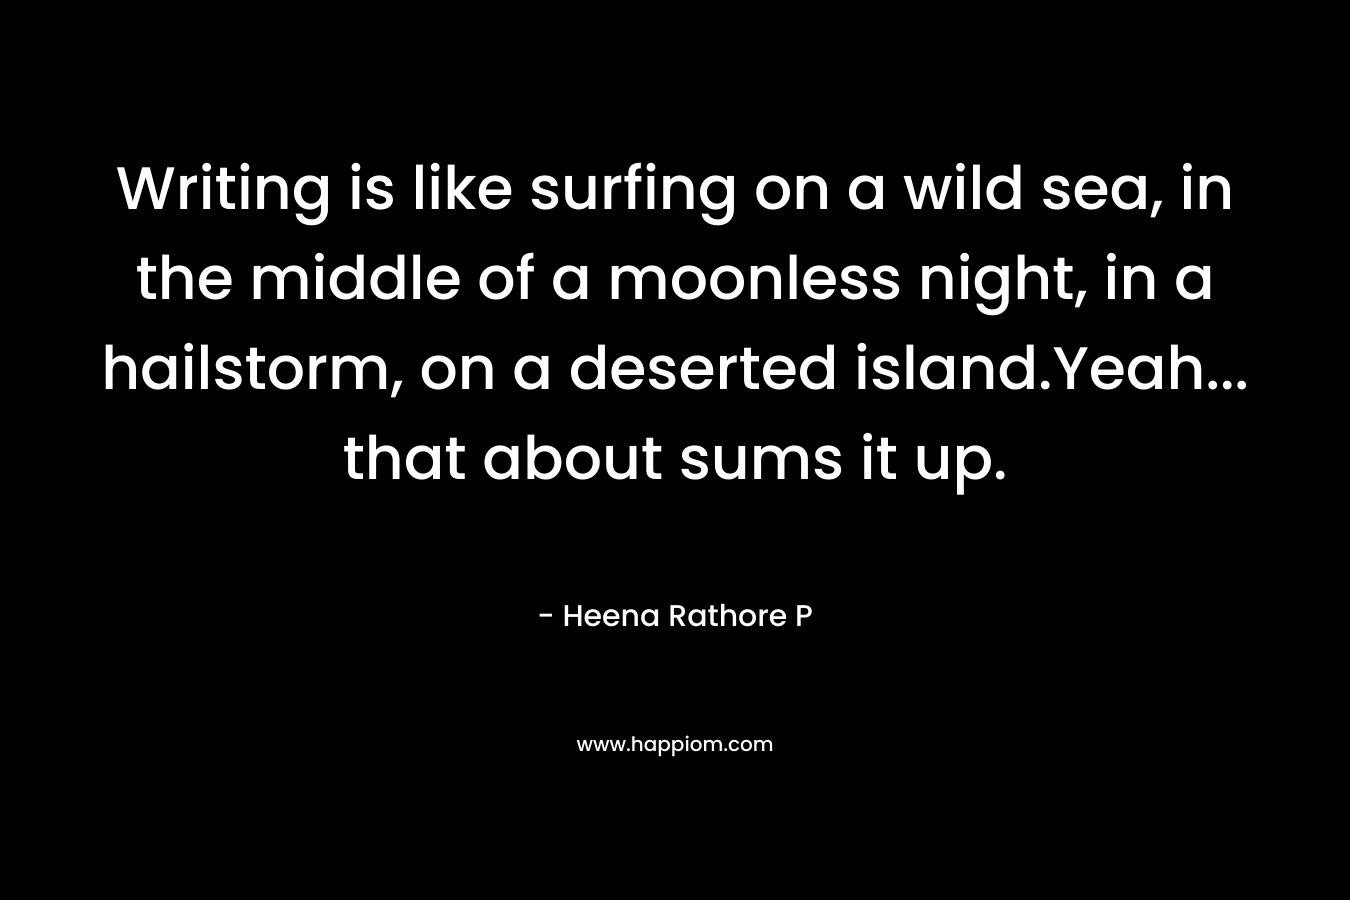 Writing is like surfing on a wild sea, in the middle of a moonless night, in a hailstorm, on a deserted island.Yeah… that about sums it up. – Heena Rathore P